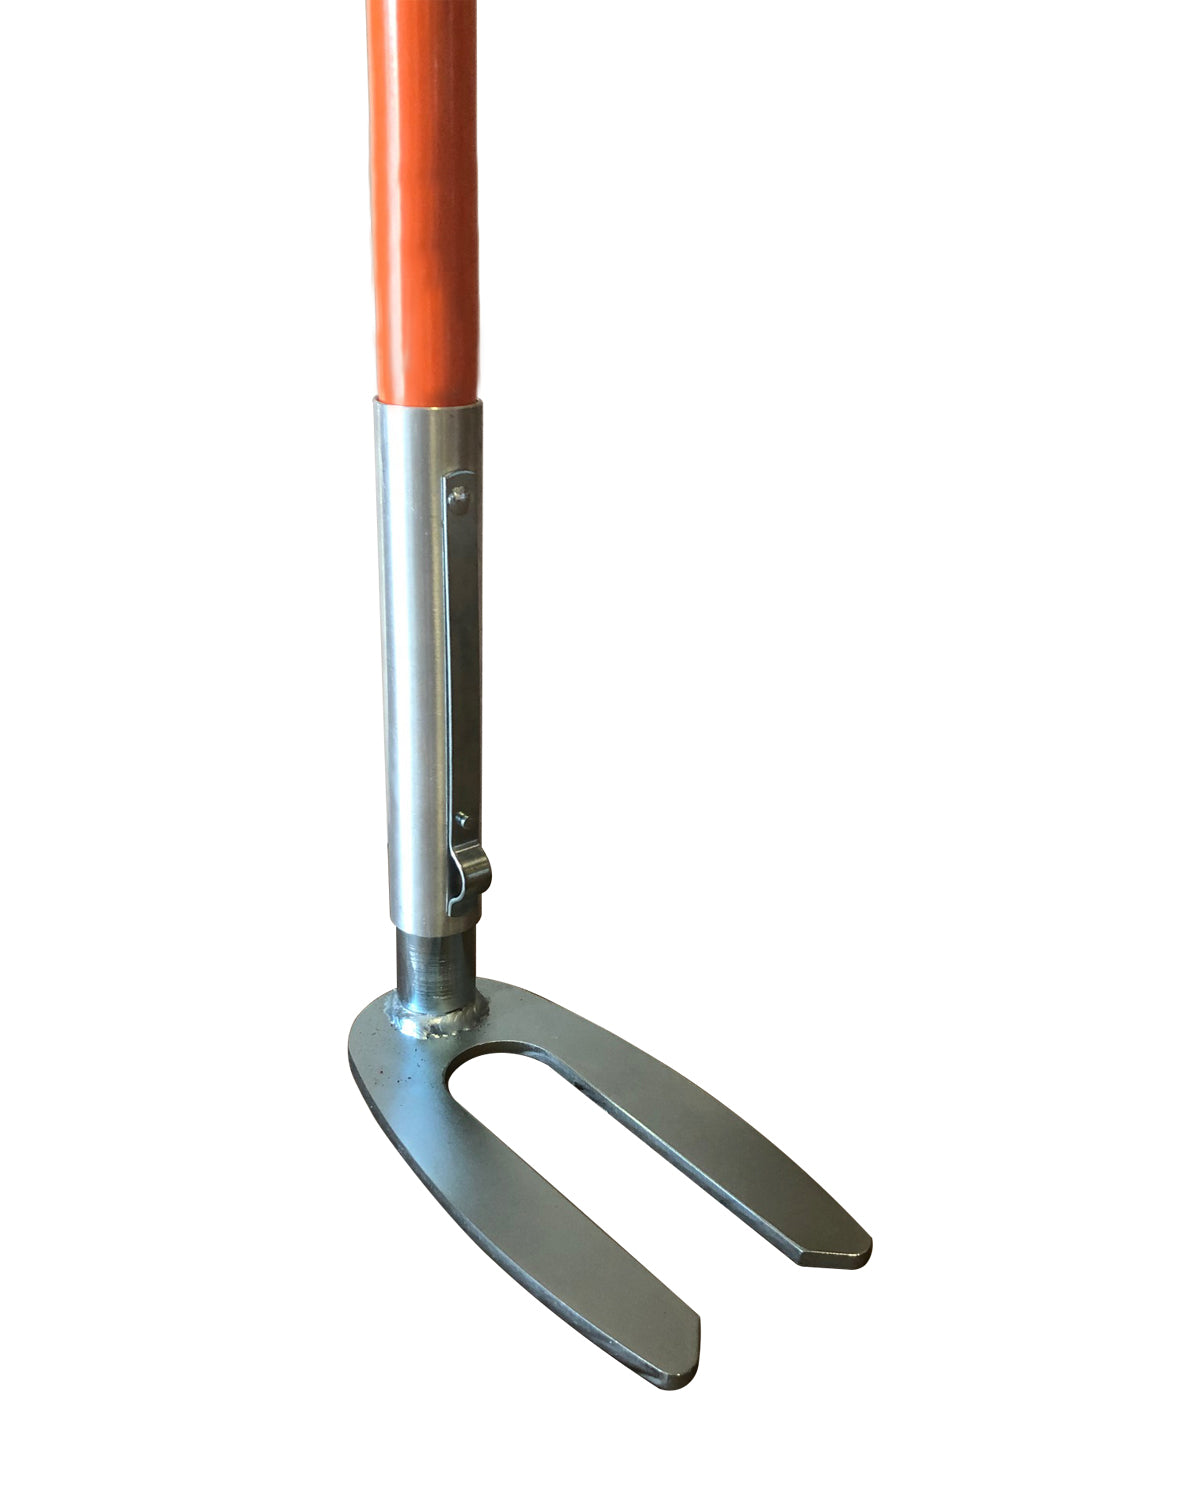 hose grabber for sewer cleaning